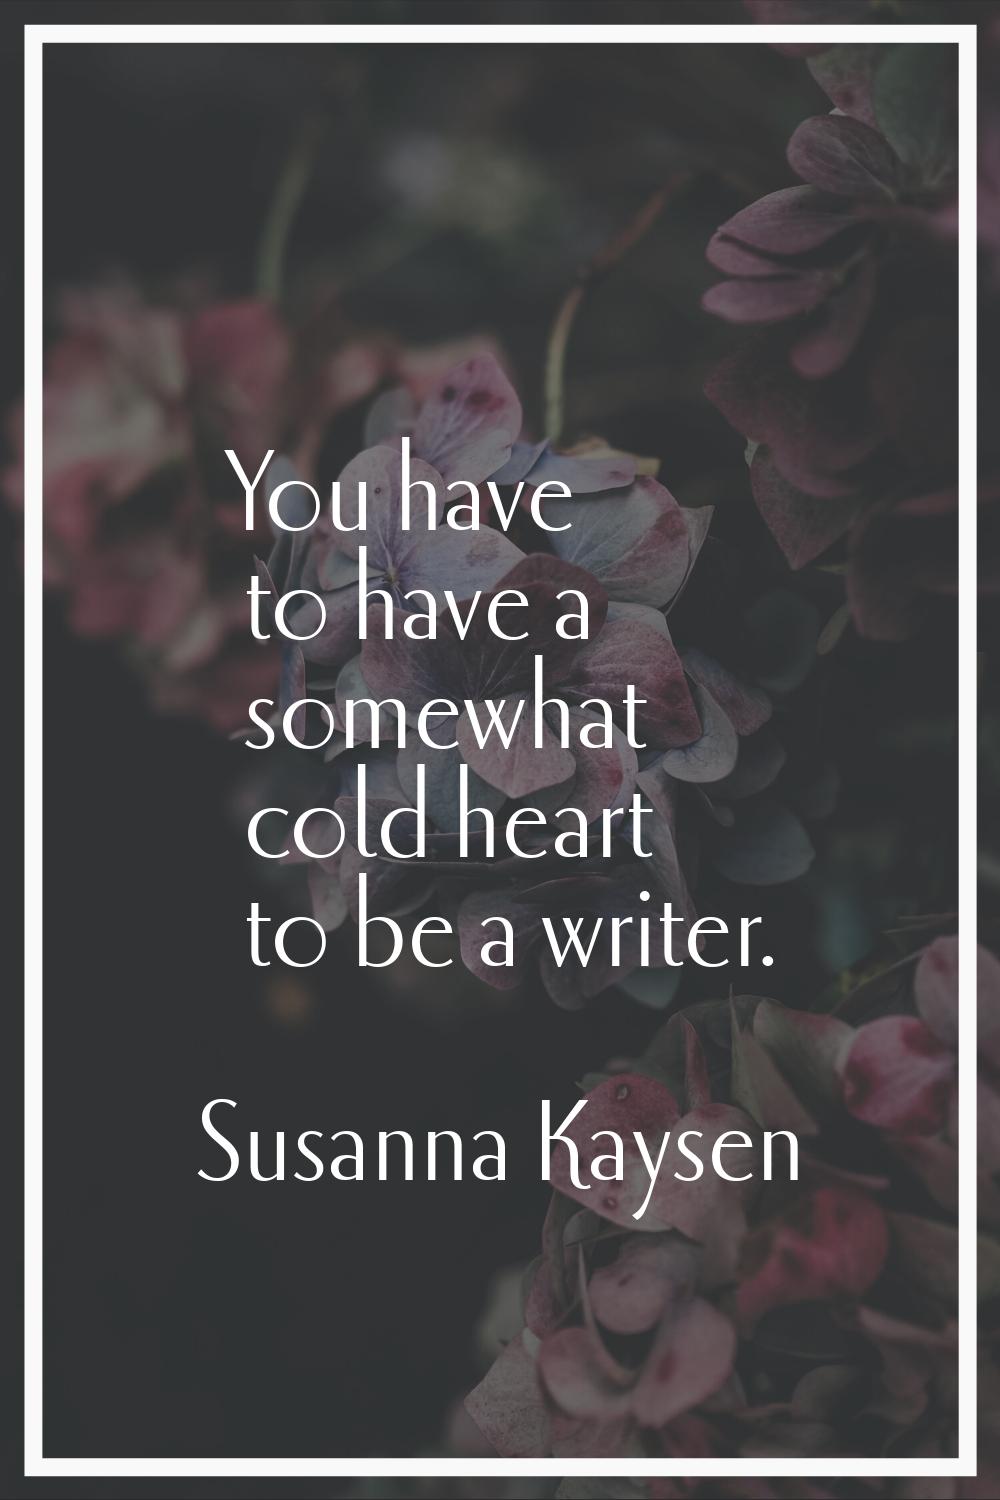 You have to have a somewhat cold heart to be a writer.